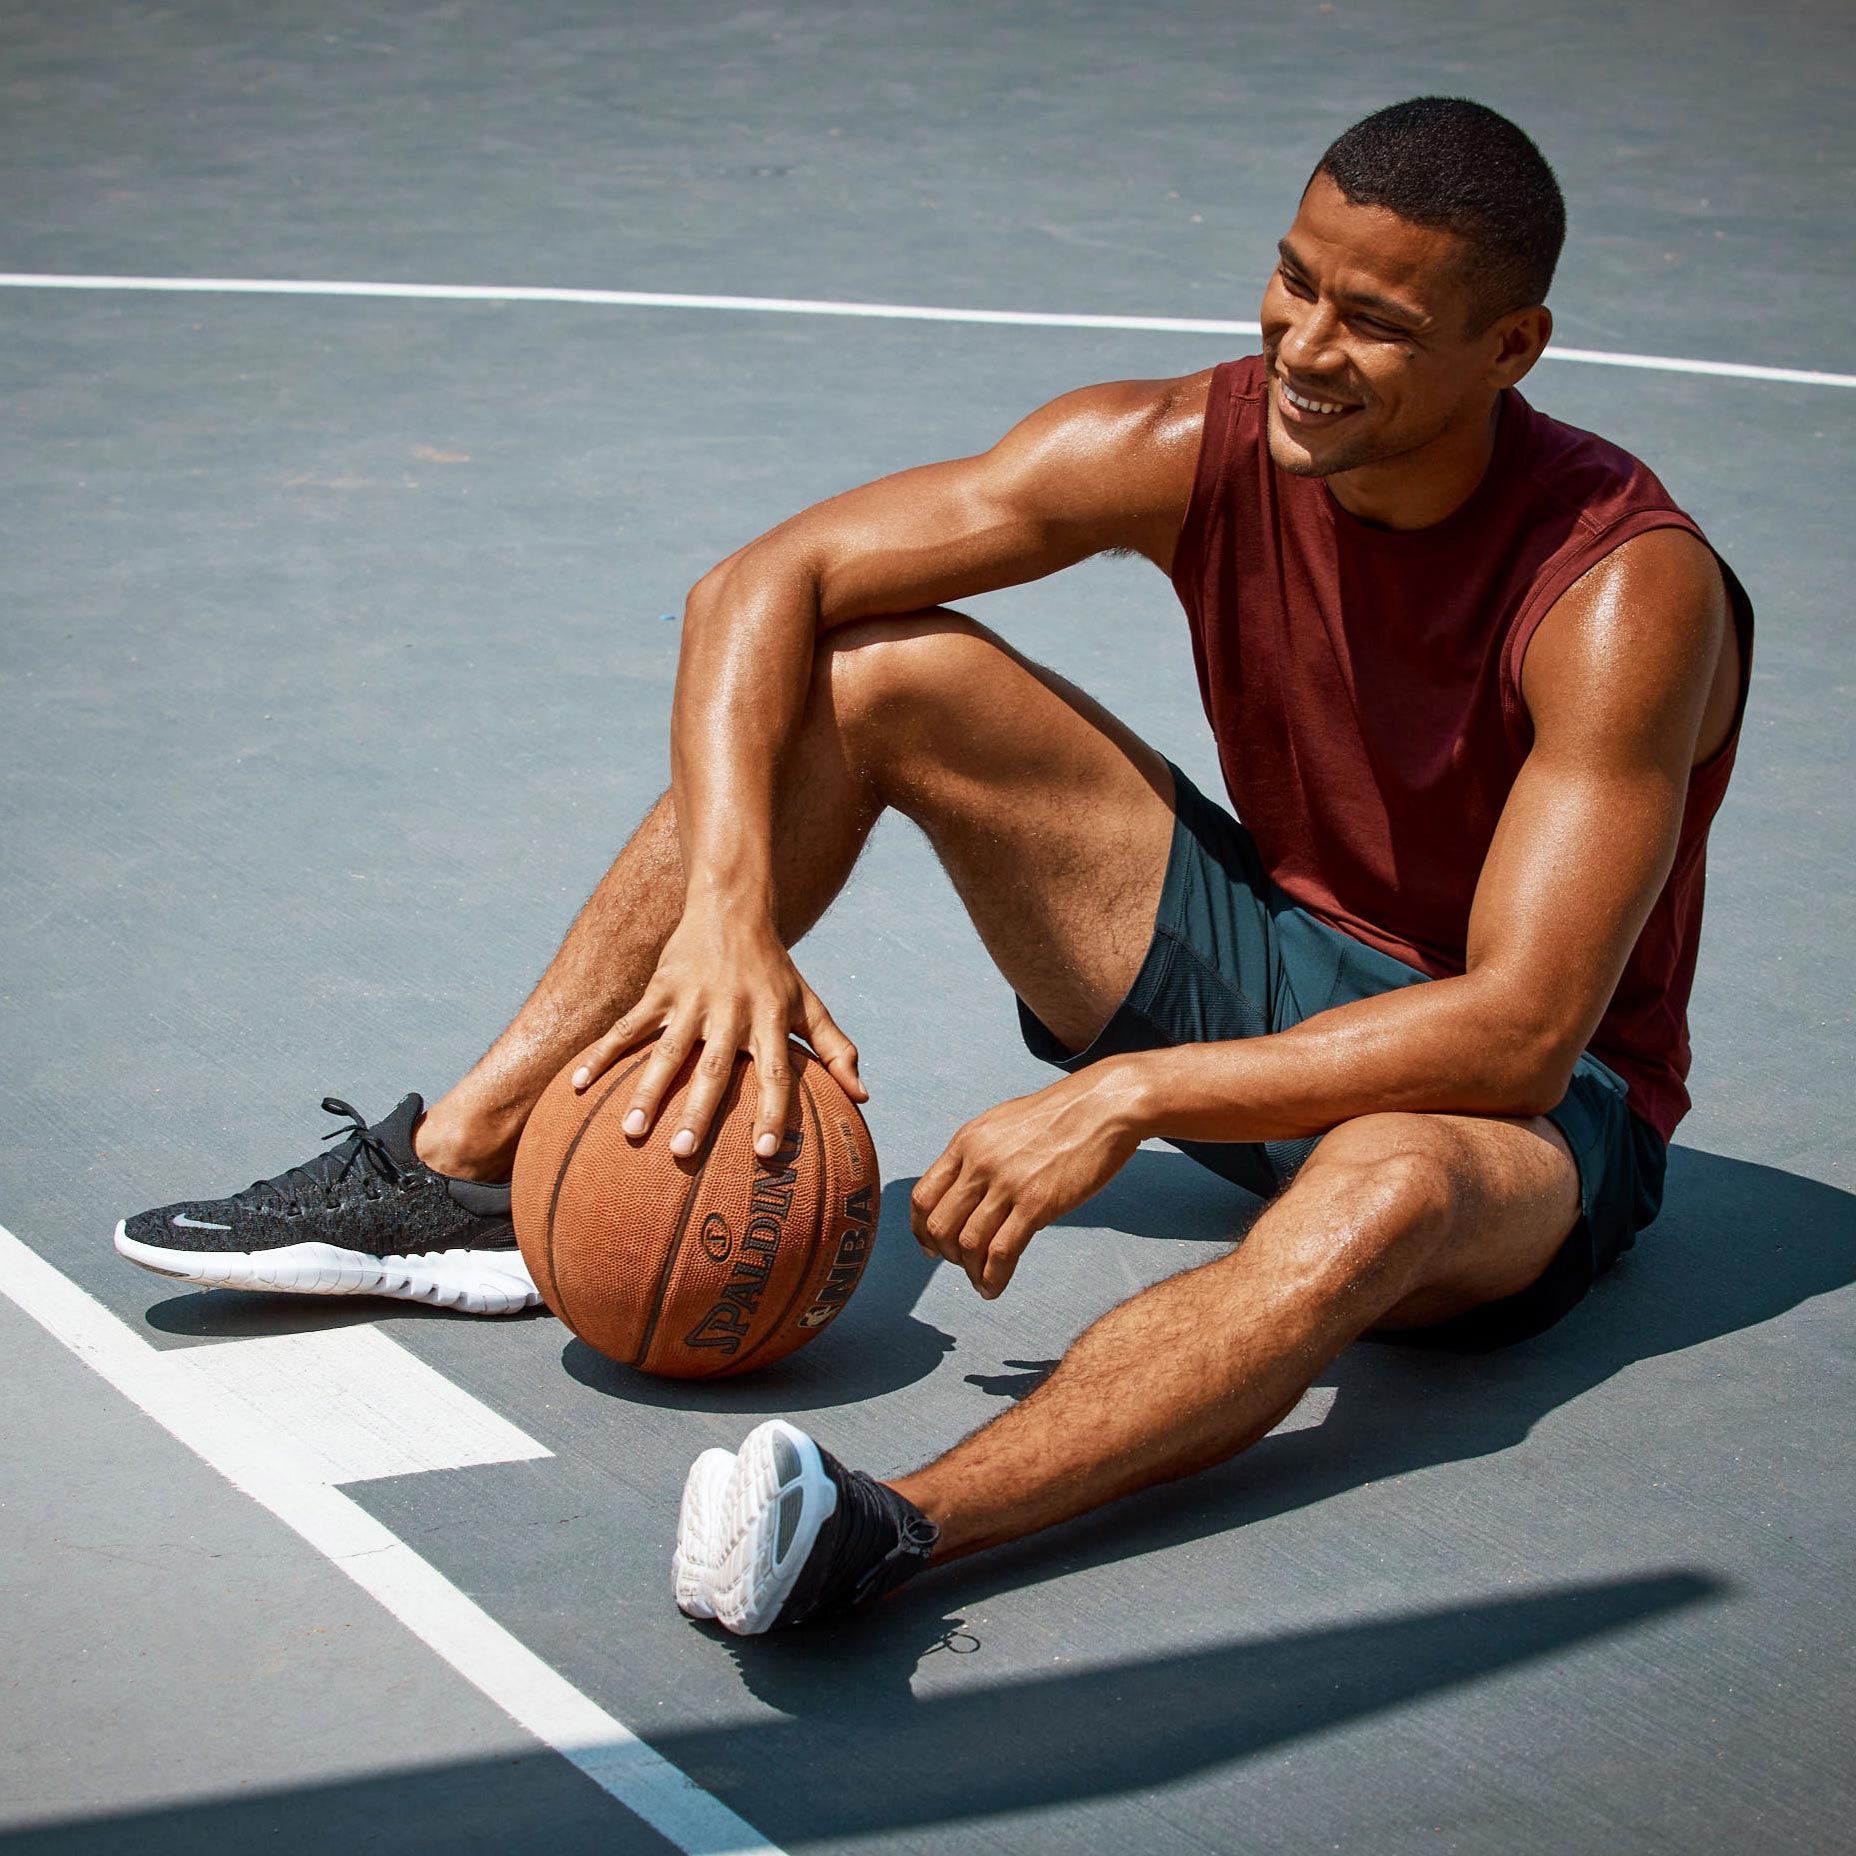 MPG male model taking a rest on a basketball court